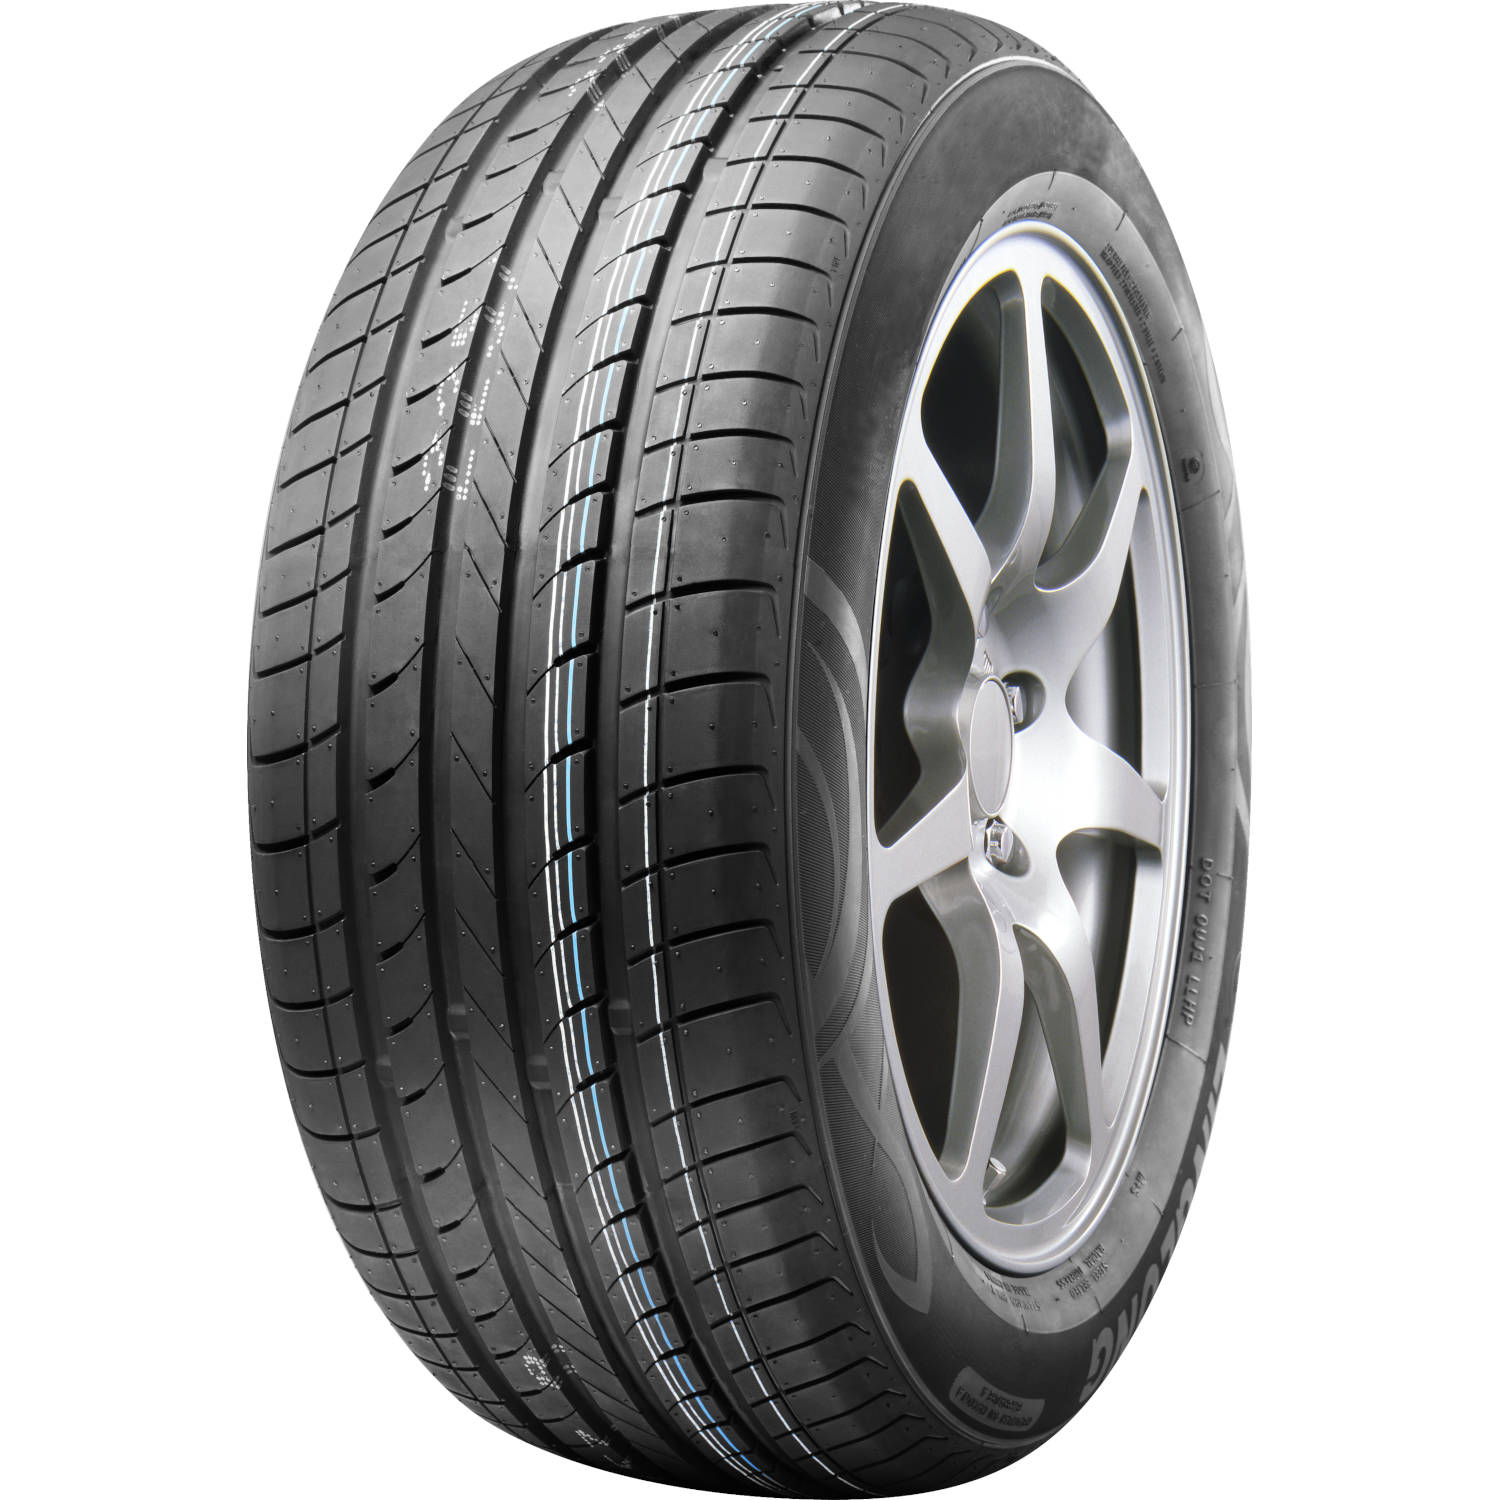 ROAD ONE CAVALRY HP 235/55R17 (27.2X9.3R 17) Tires